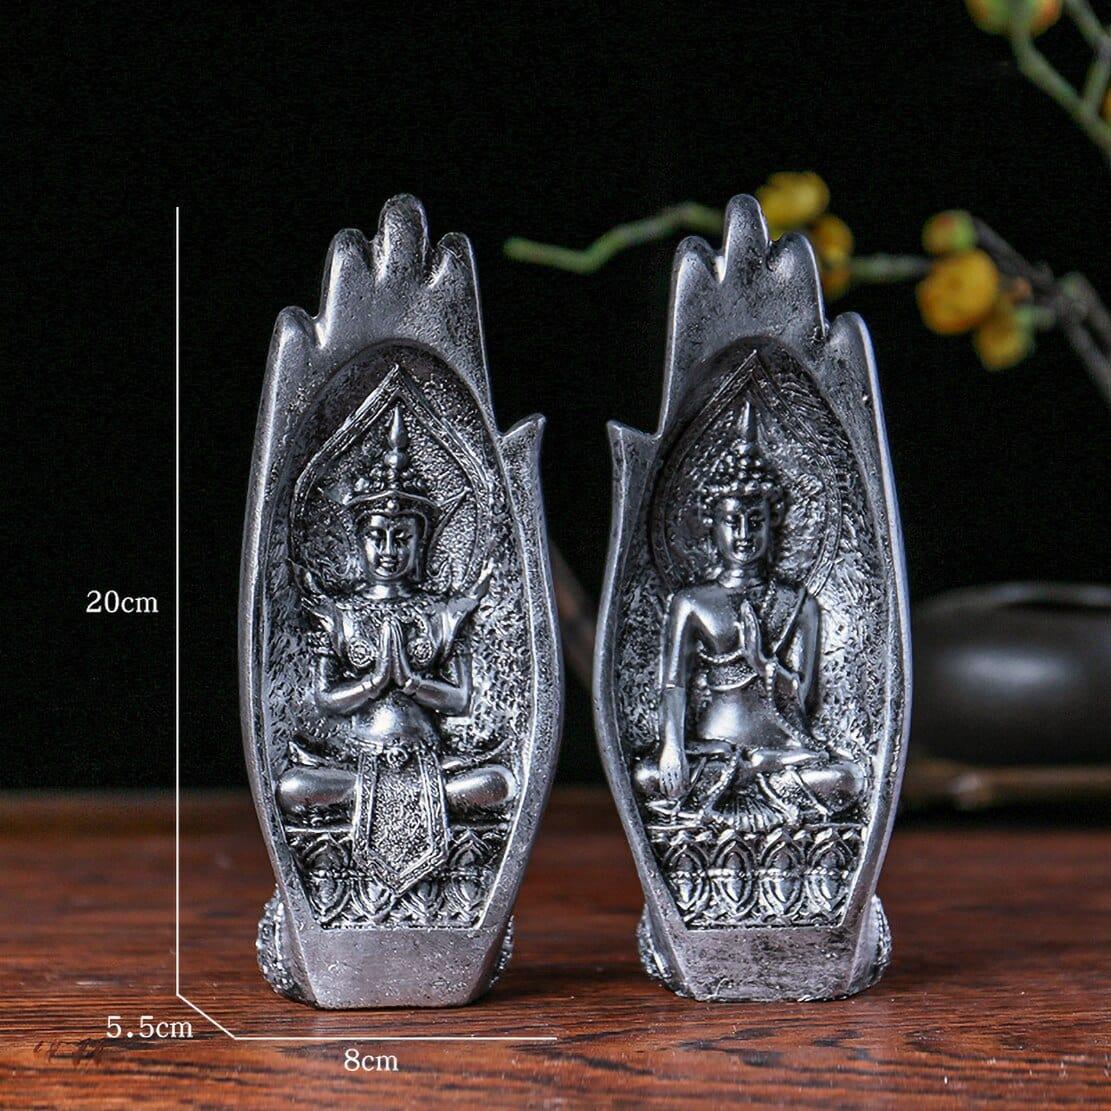 Shop 0 Silvery / China Creative Thai Style Buddha Ornament Exotic Home Decoration South Asia Buddism Type Decor Polyresin Hand Shape Buddhist Statue Mademoiselle Home Decor